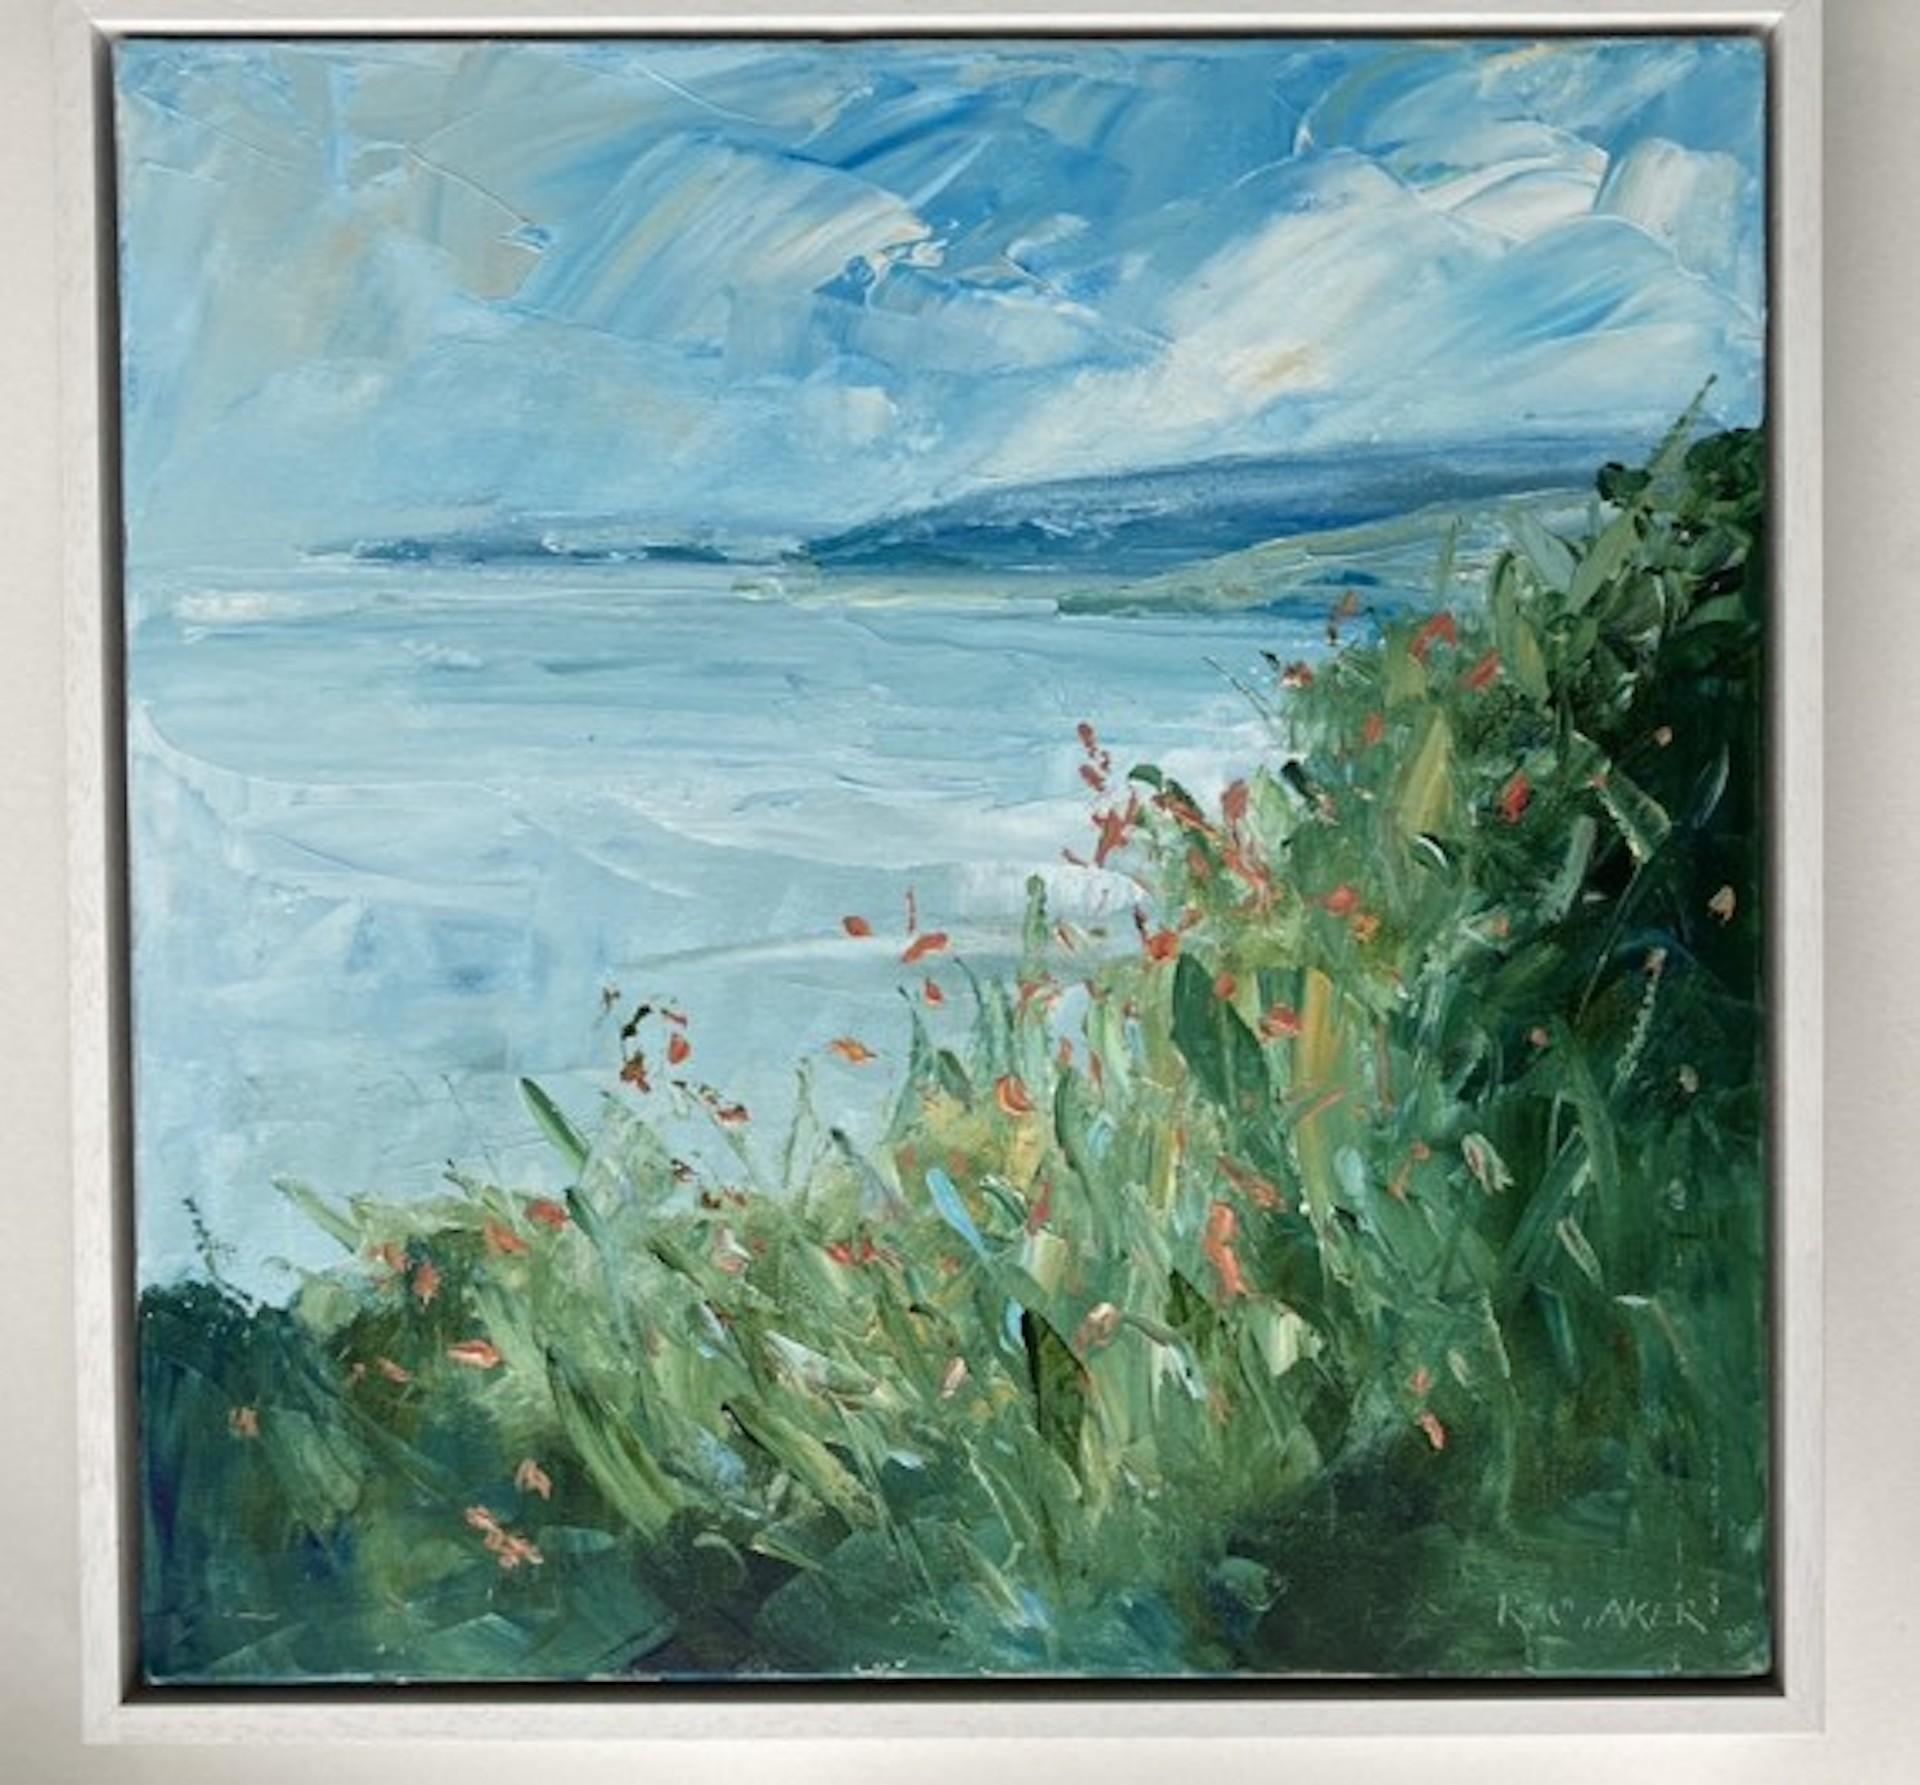 Summer near New Quay [2021]

original
Acrylic on canvas
Image size: H:60 cm x W:60 cm
Complete Size of Unframed Work: H:60 cm x W:60 cm x D:4cm
Frame Size: H:64 cm x W:64 cm x D:5.5cm
Sold Framed
Please note that insitu images are purely an